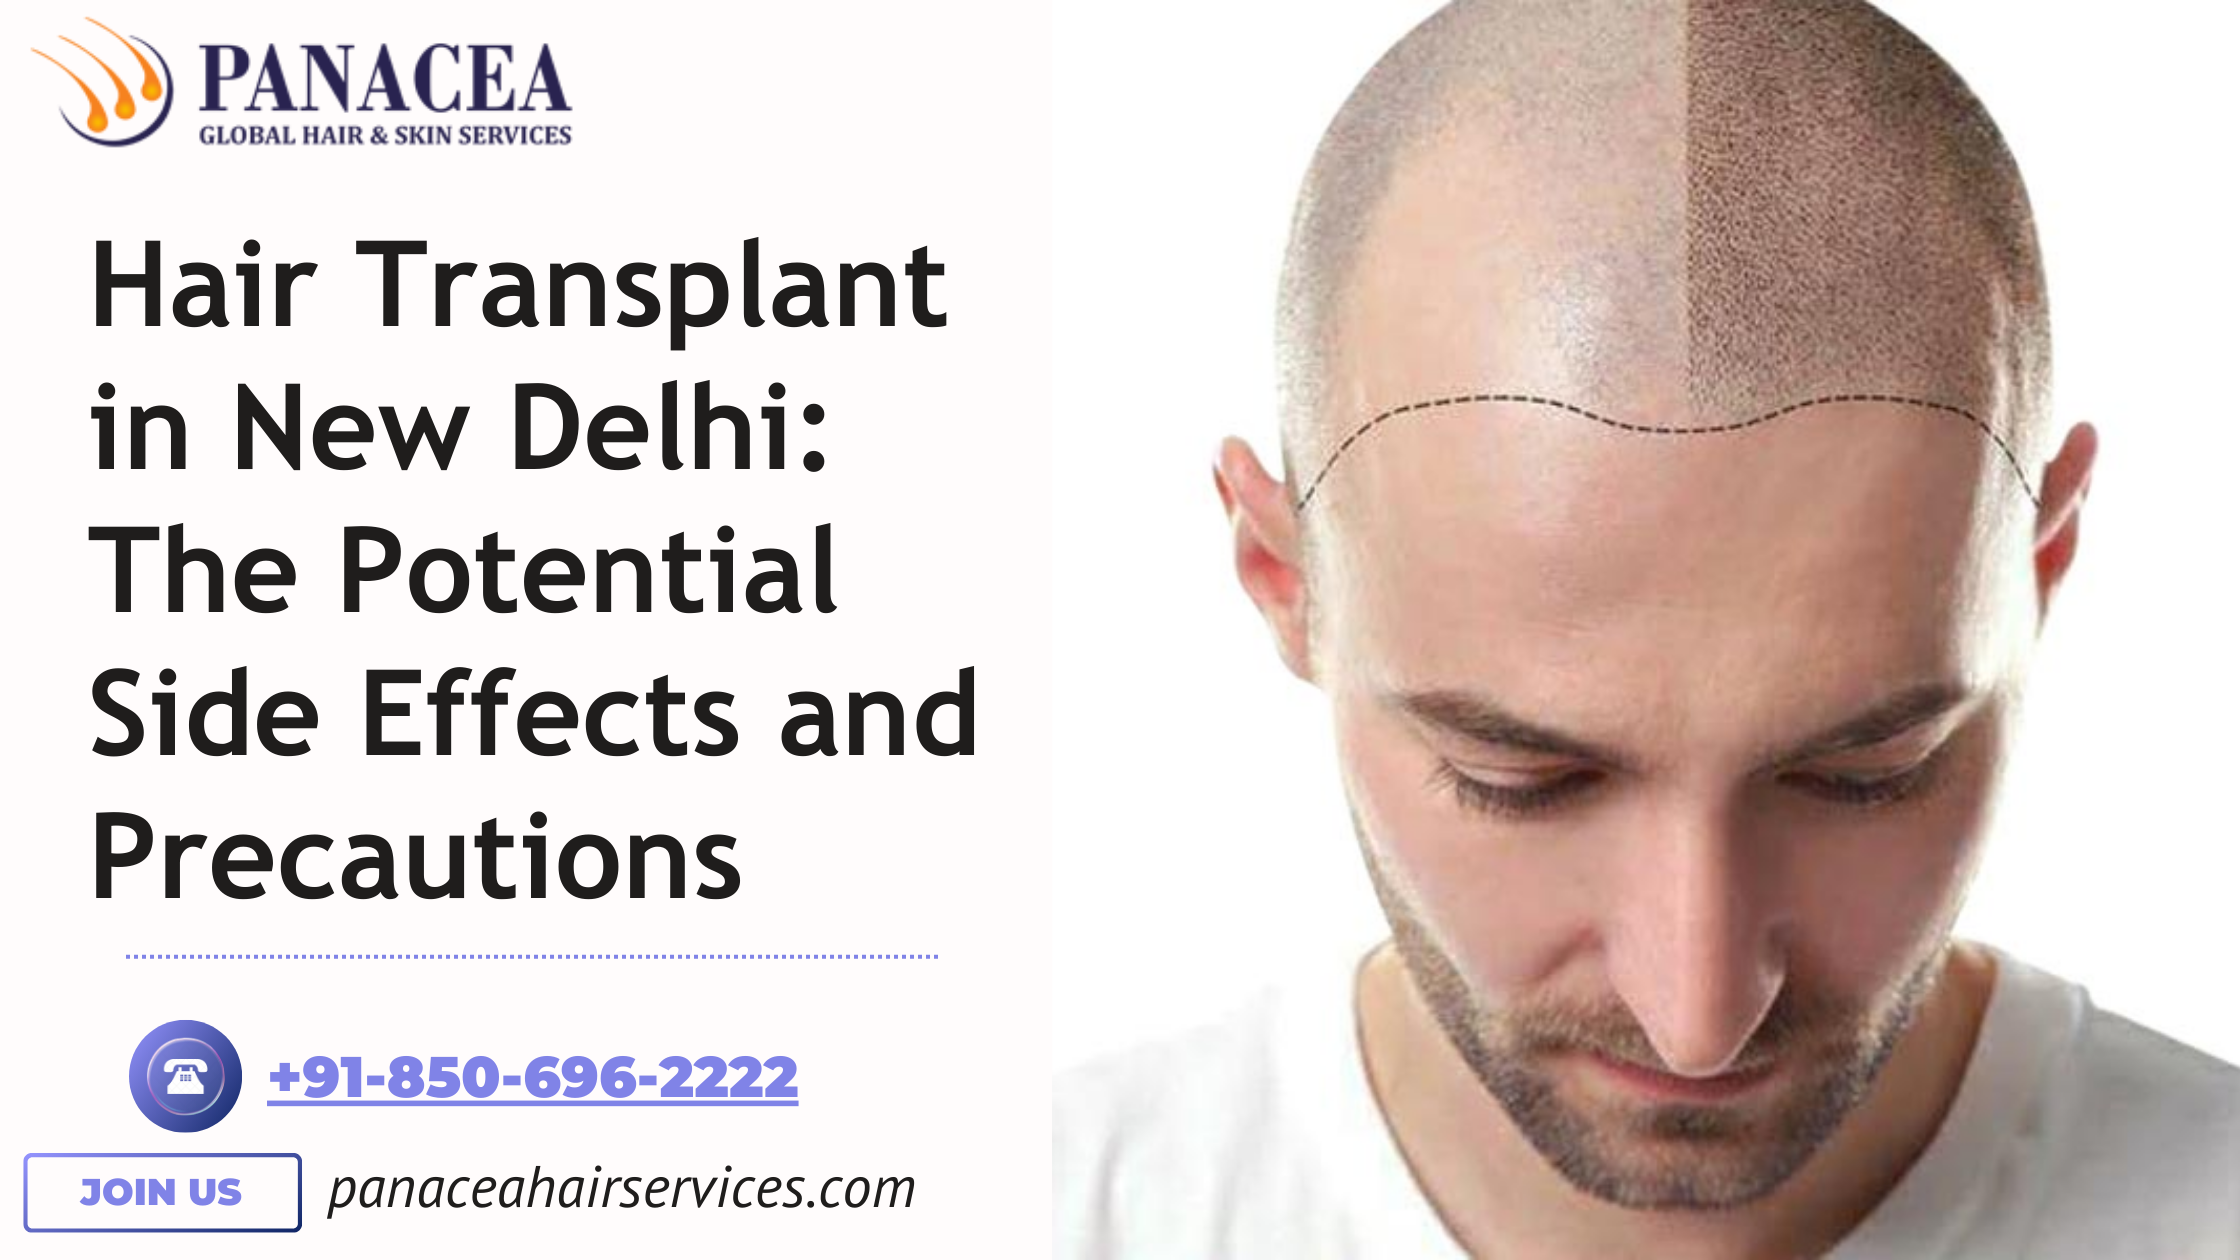 Hair Transplant in New Delhi The Potential Side Effects and Precautions